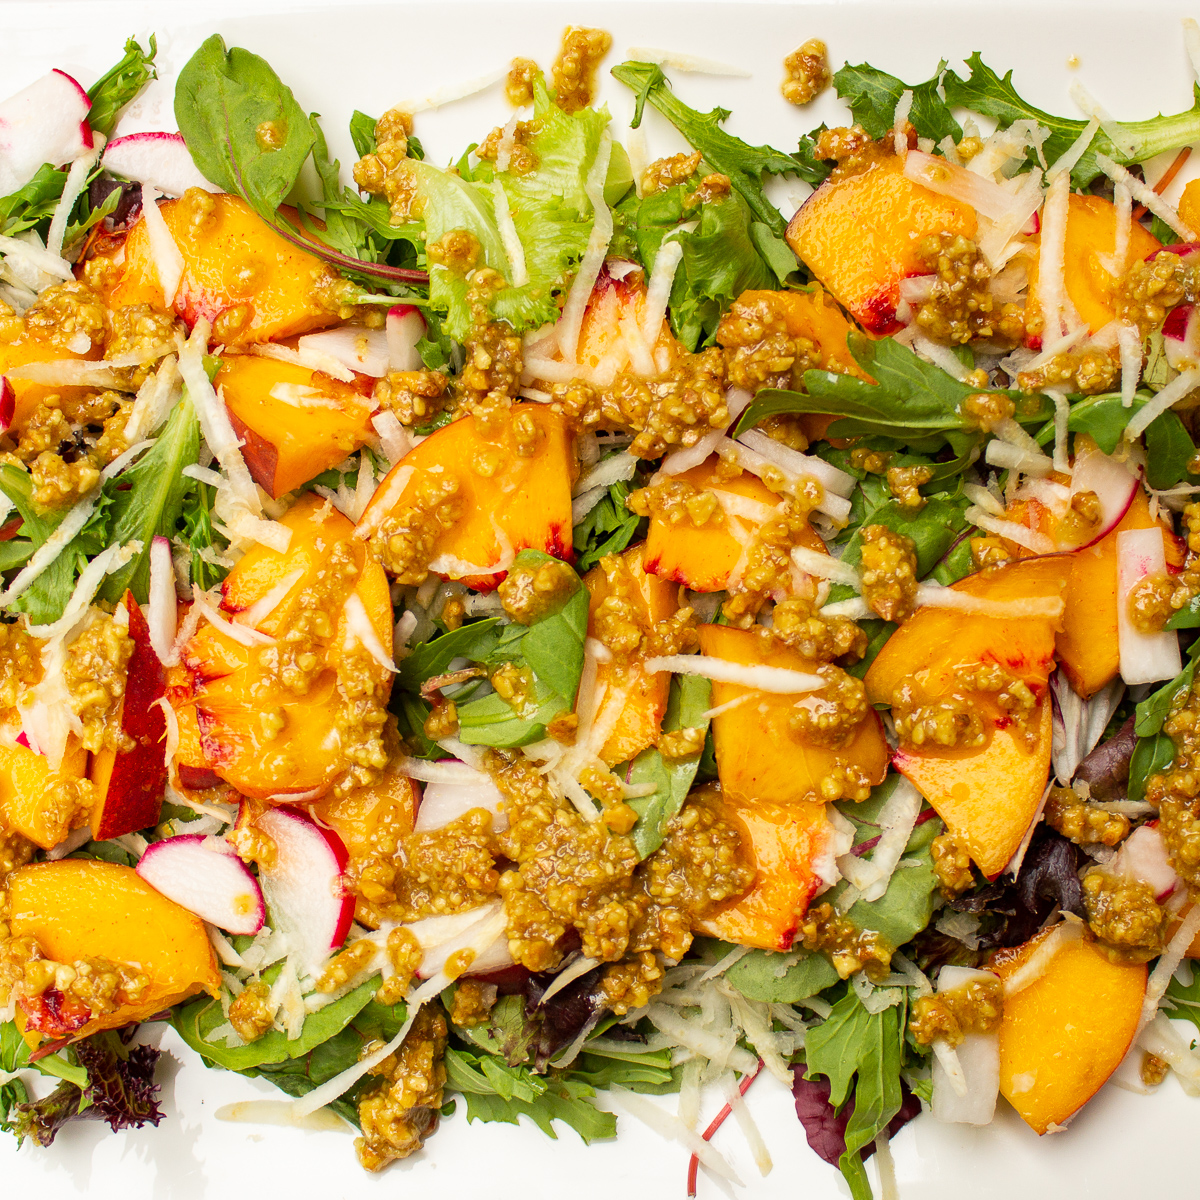 peach salad with walnut dressing on white plate